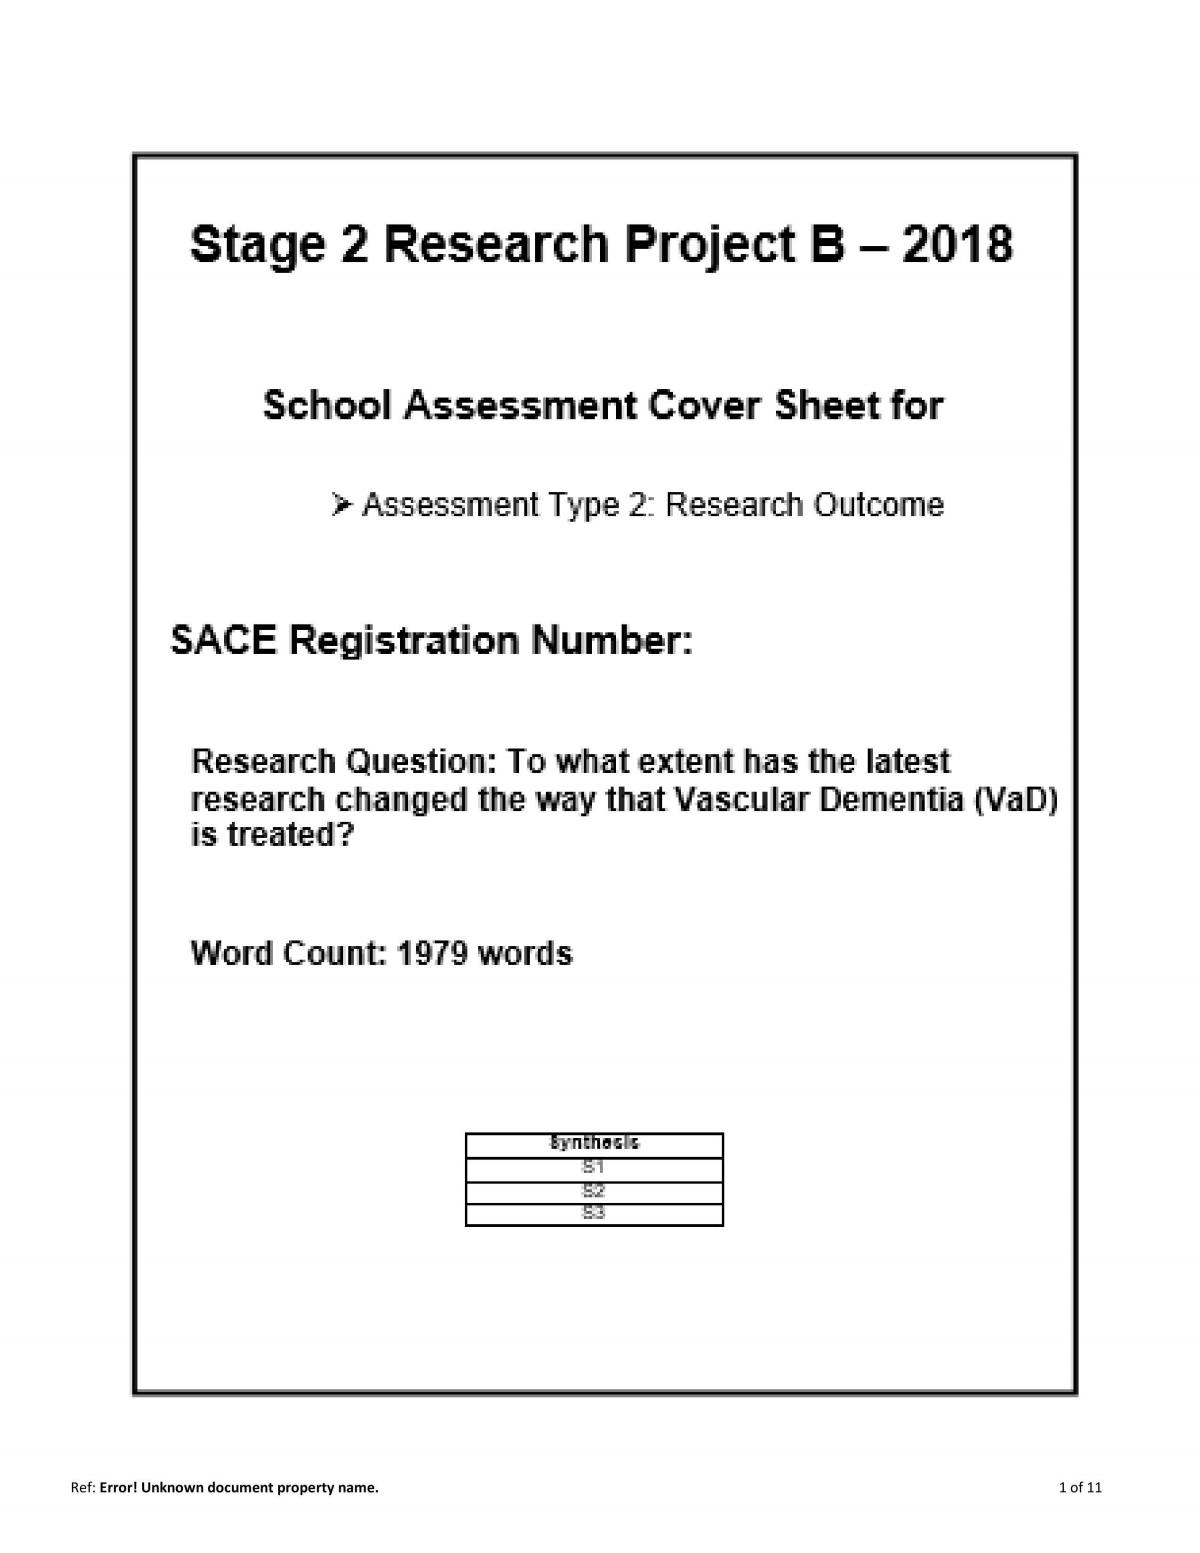 sace research project outcome word count